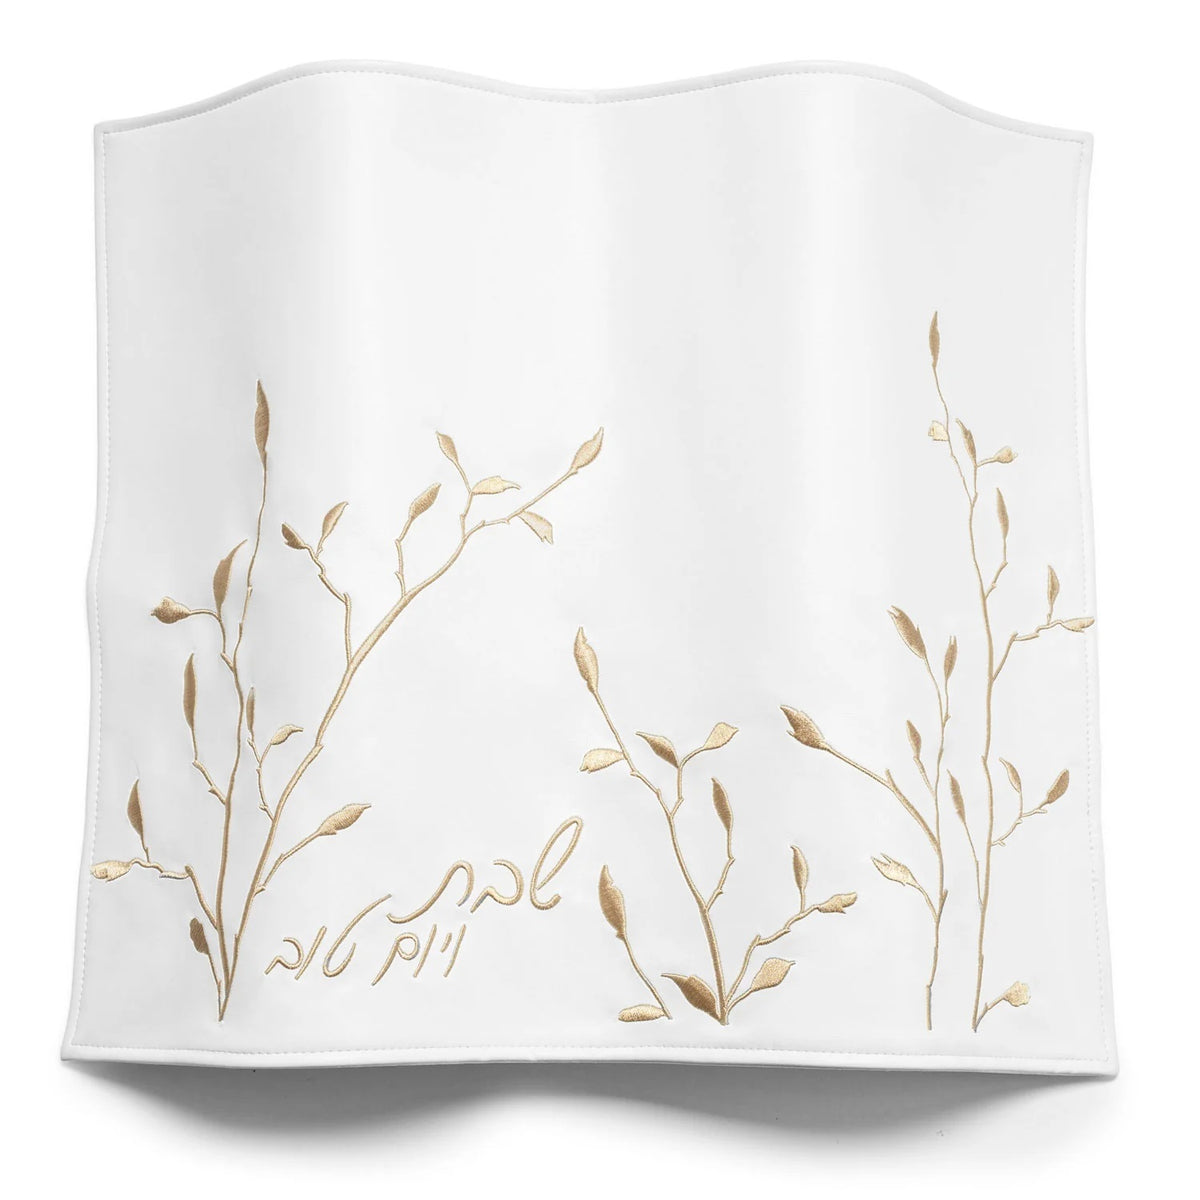 Waterdale Leaf Embroidered Challah Cover, White & Gold